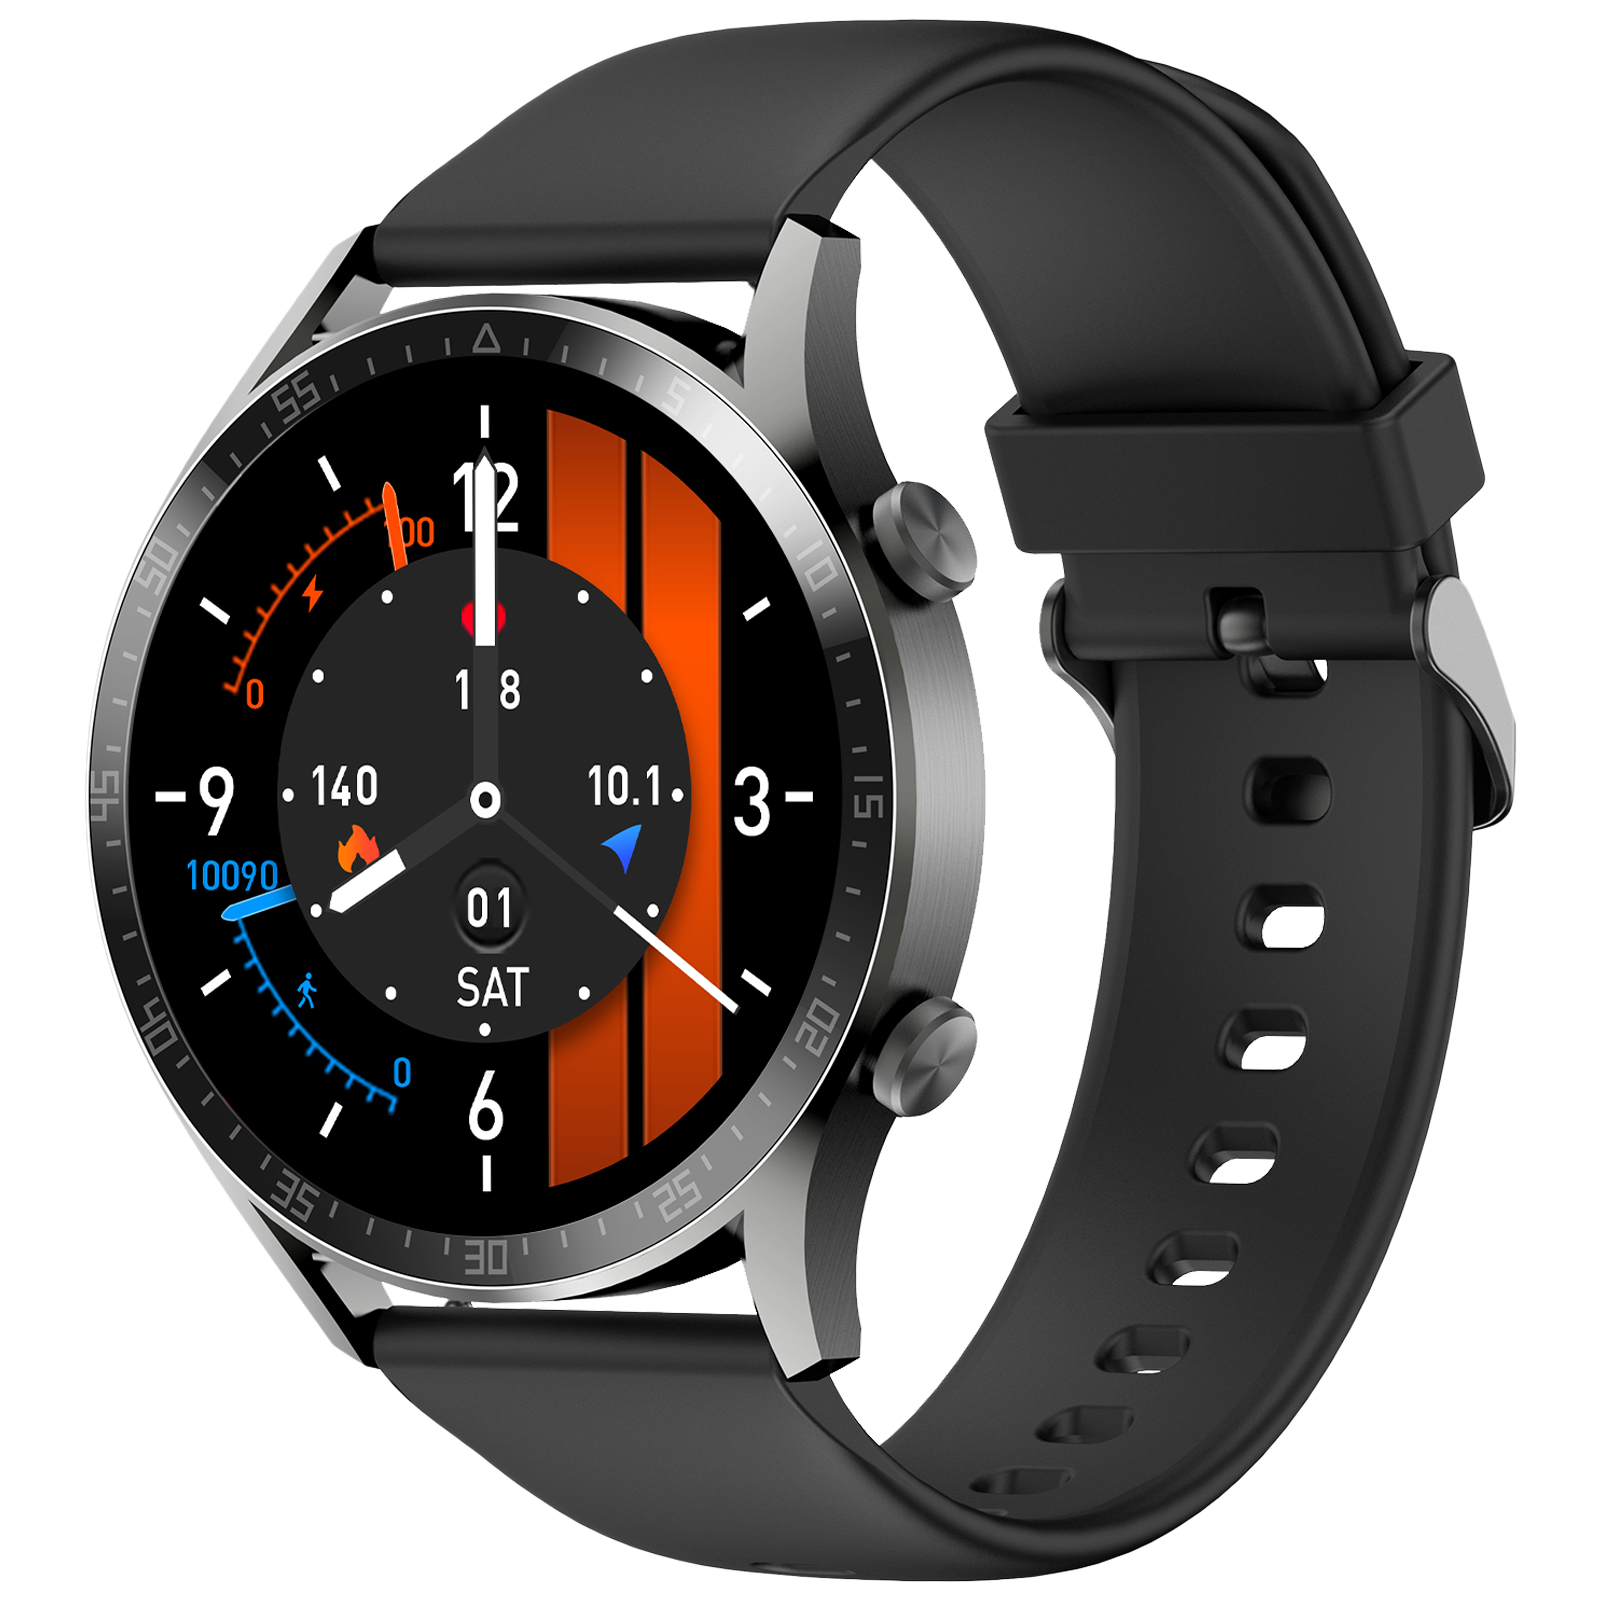 Fire-Boltt Talk 2 Pro BSW118 Smartwatch with Bluetooth Calling (35.3mm TFT LCD Display, IP68 Water Resistant, Black Strap)